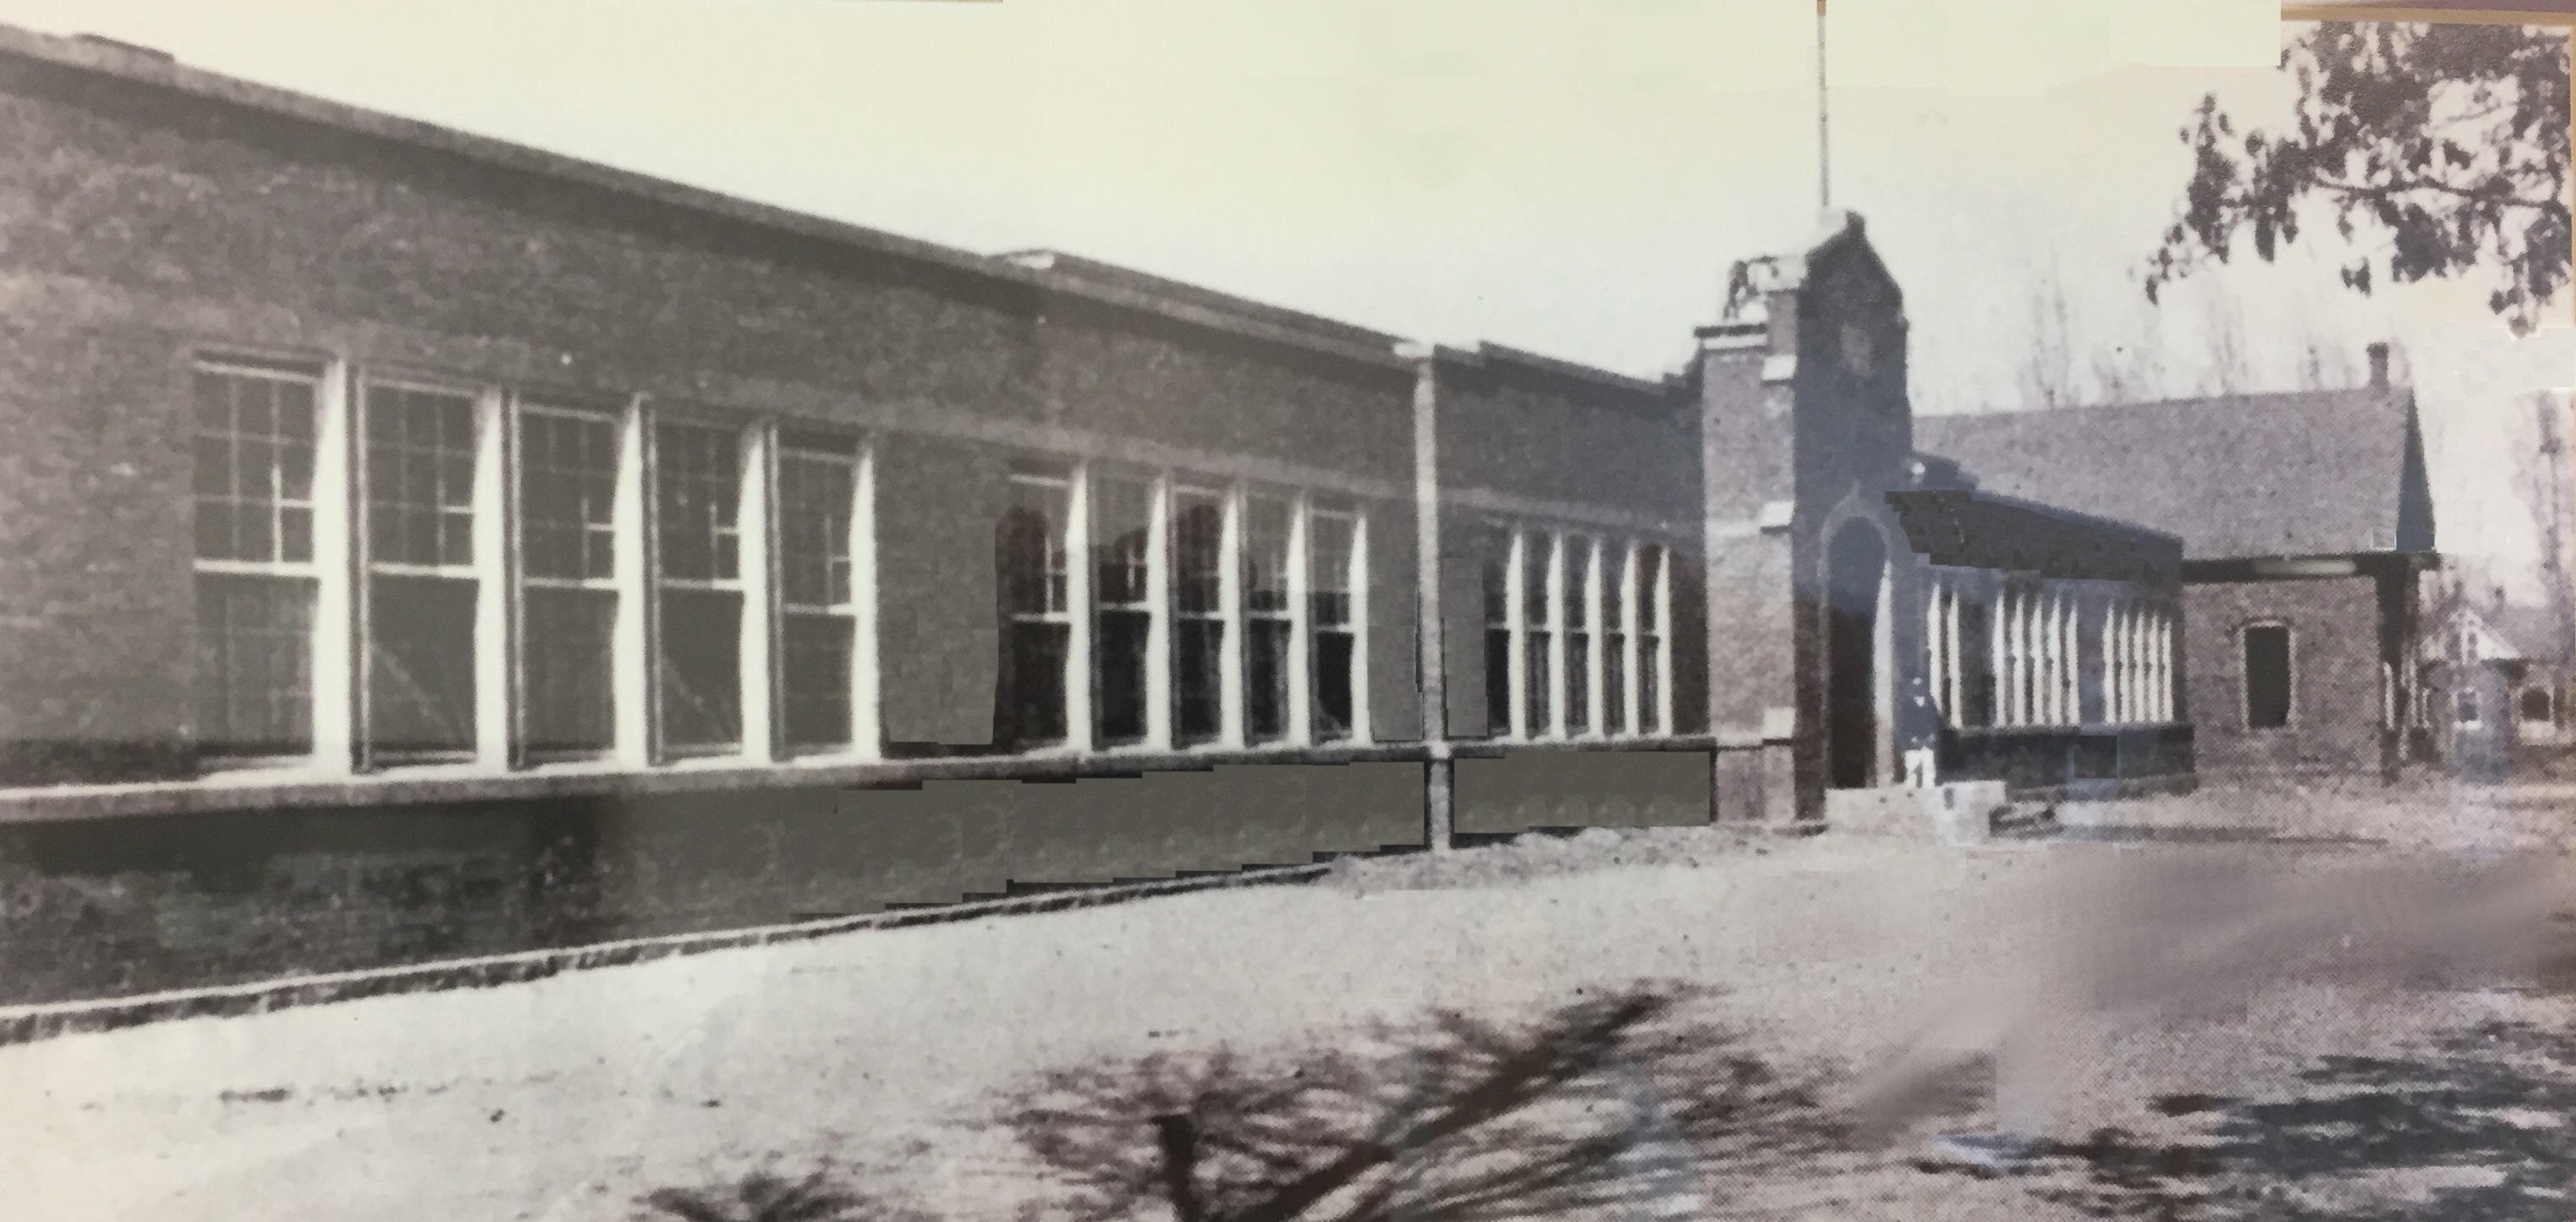 Hurricane's first elementary school and the Relief Society House